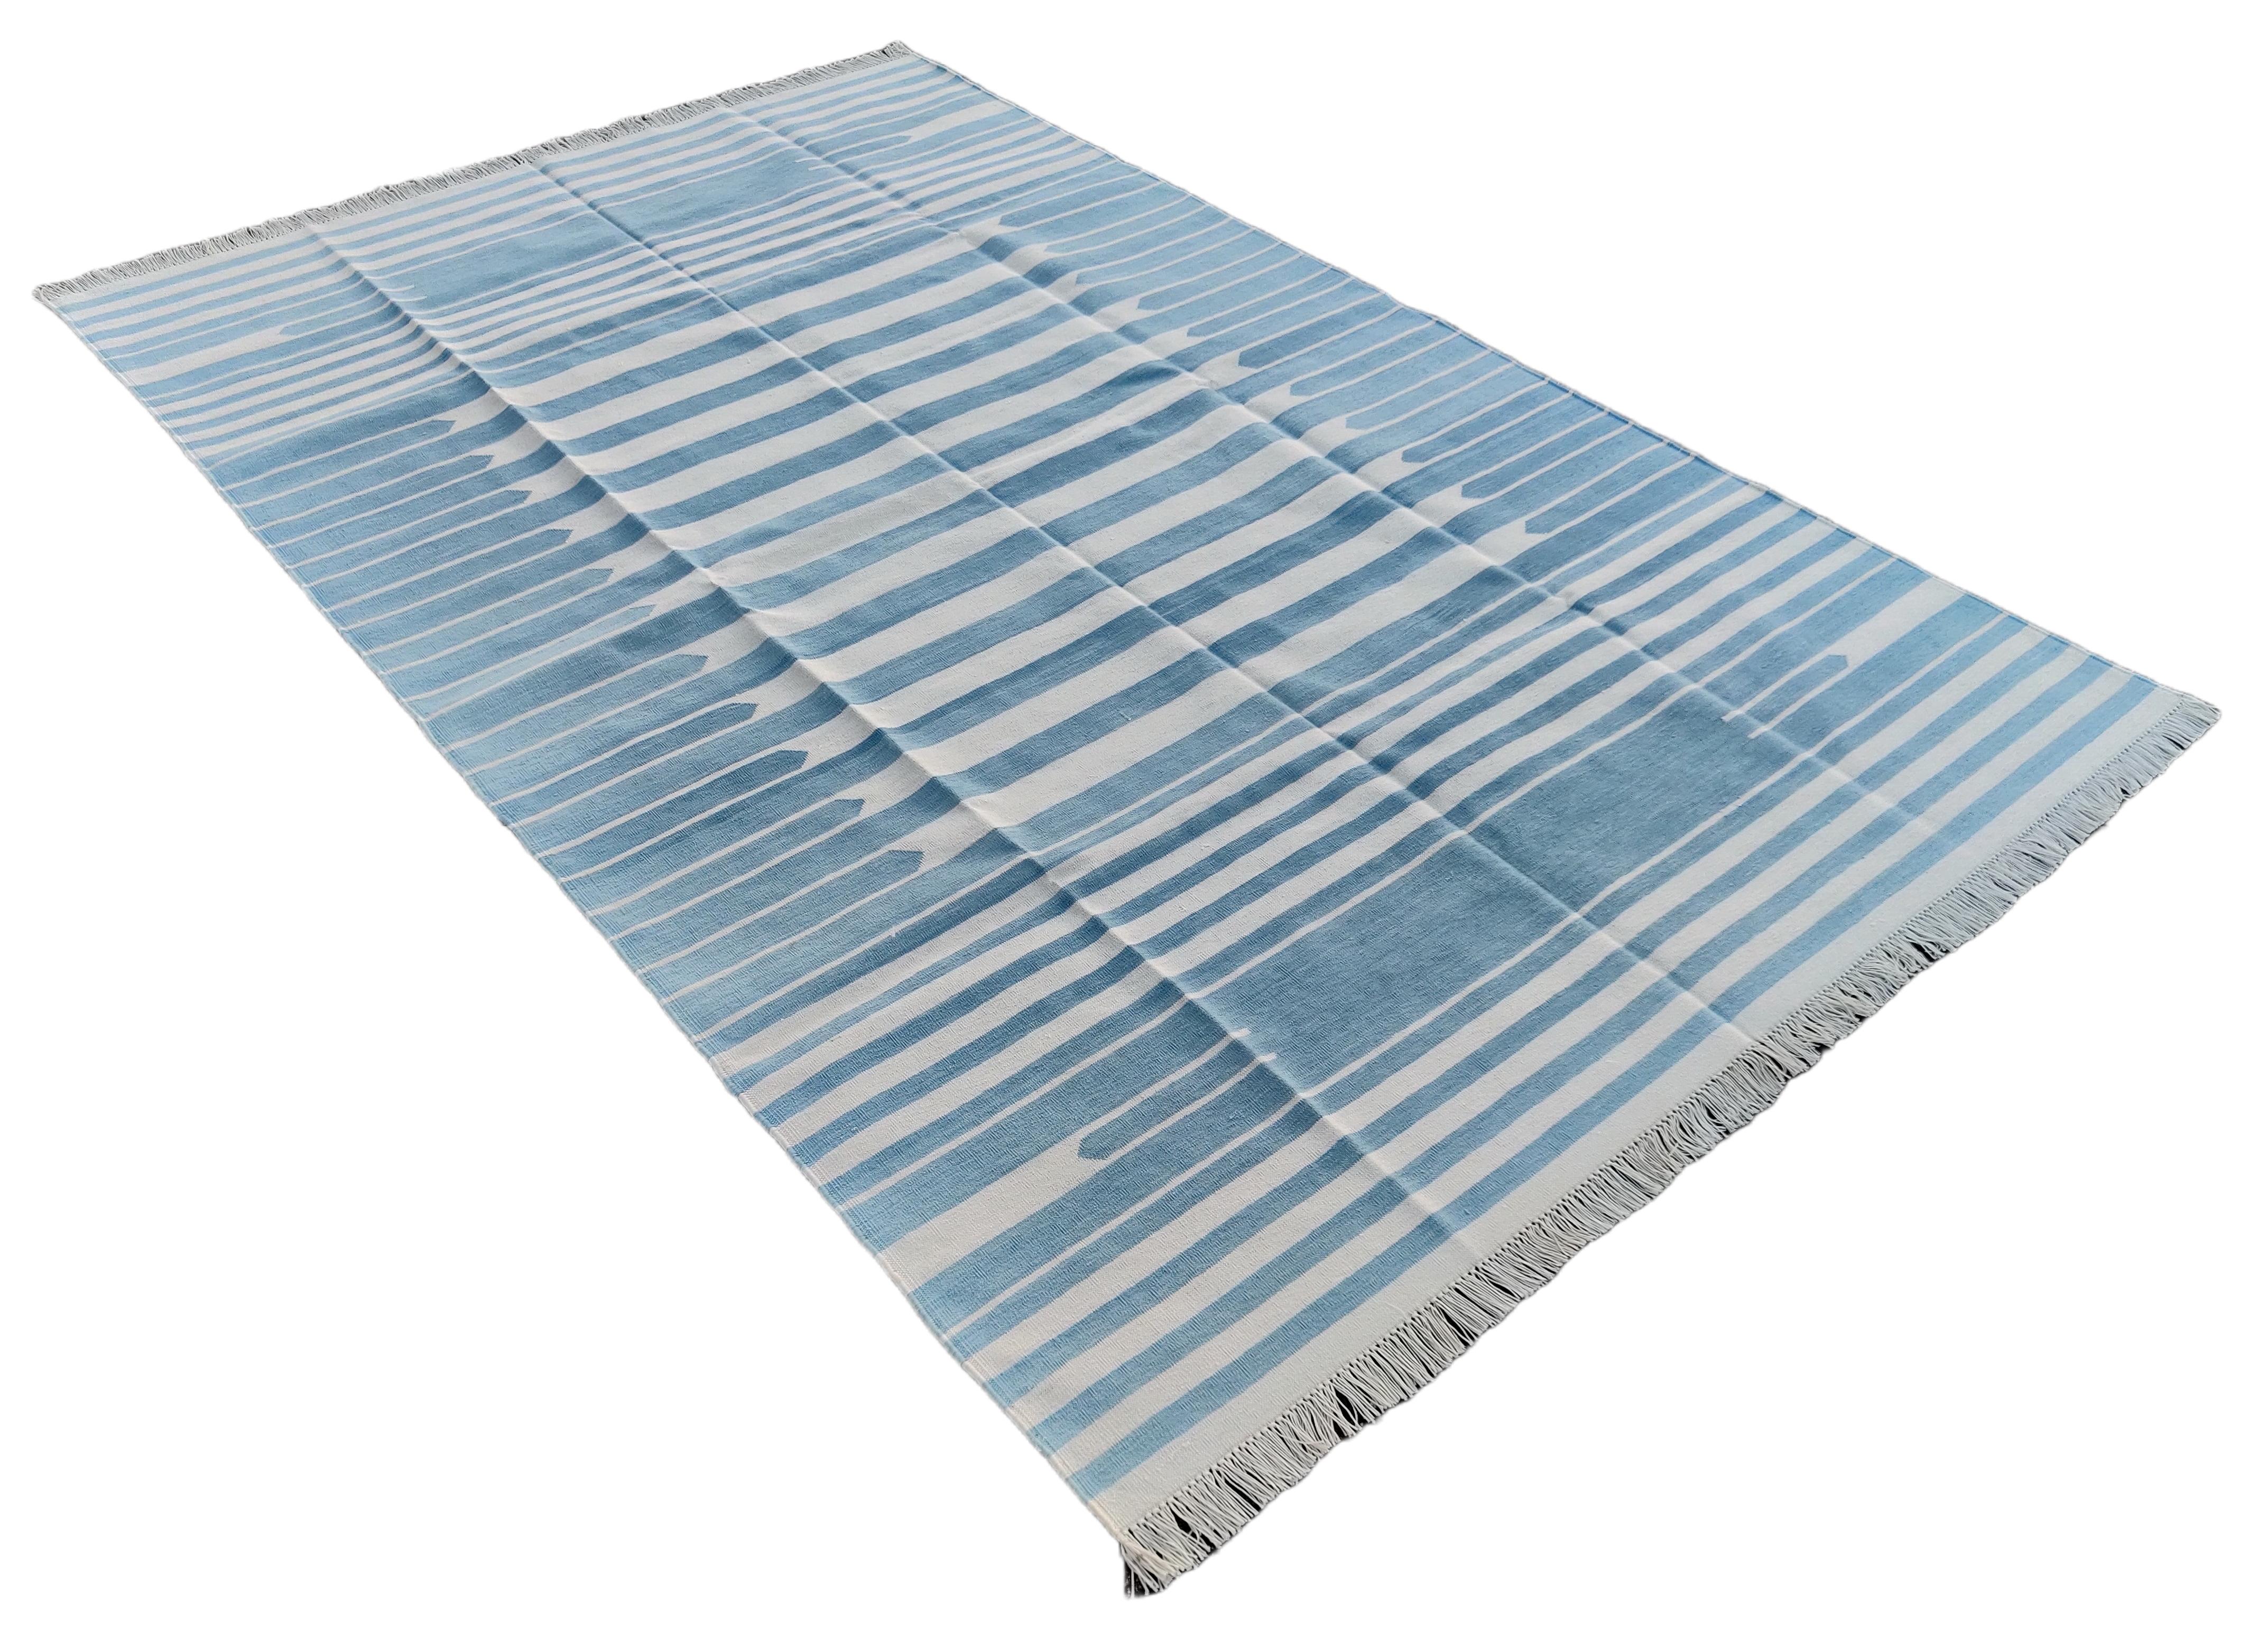 Mid-Century Modern Handmade Cotton Area Flat Weave Rug, 5x8 Blue And White Striped Indian Dhurrie For Sale